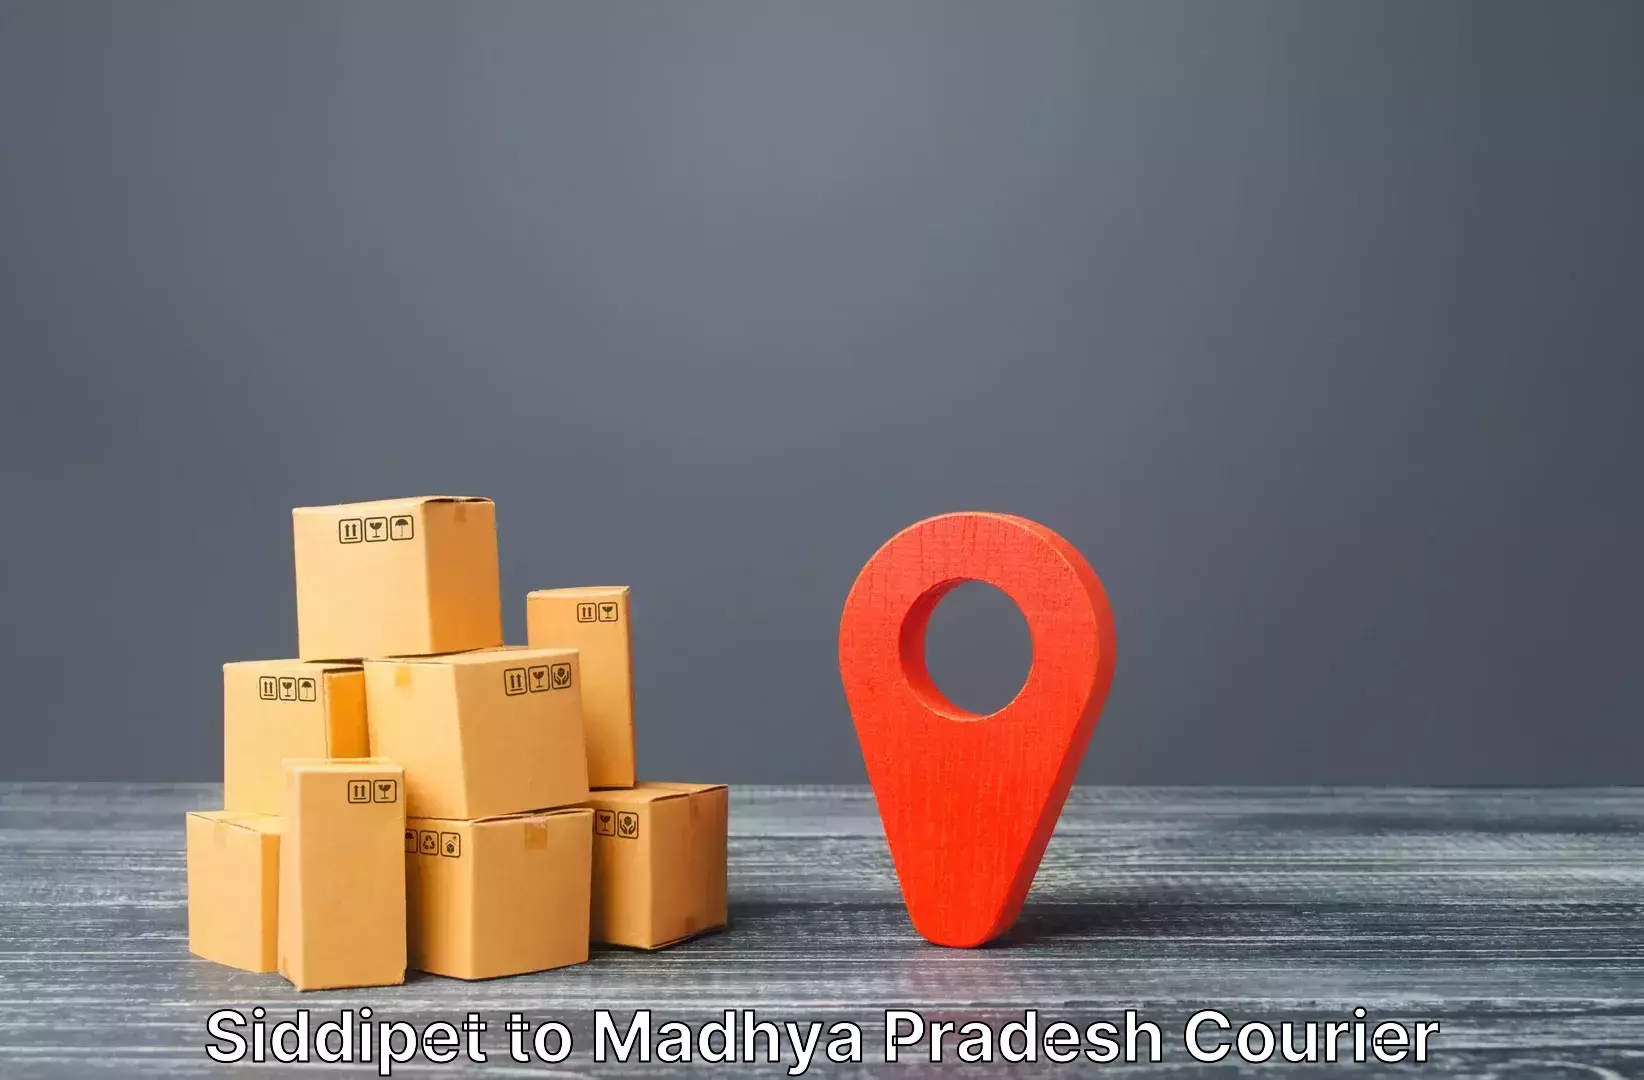 Luggage shipping specialists Siddipet to Alirajpur